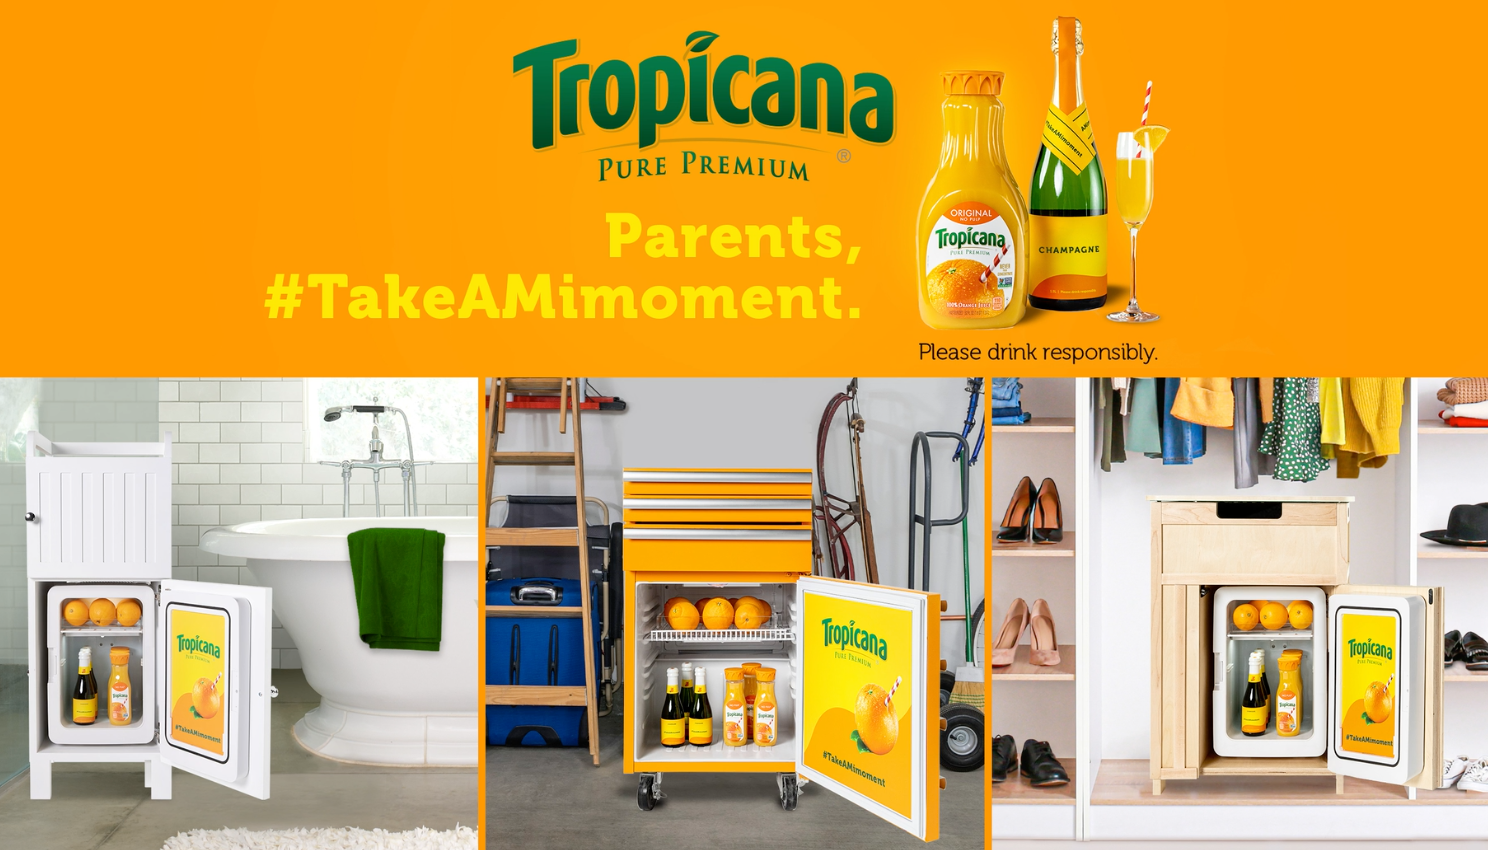 Tropicana apologises over ad encouraging parents to drink mimosas in secret